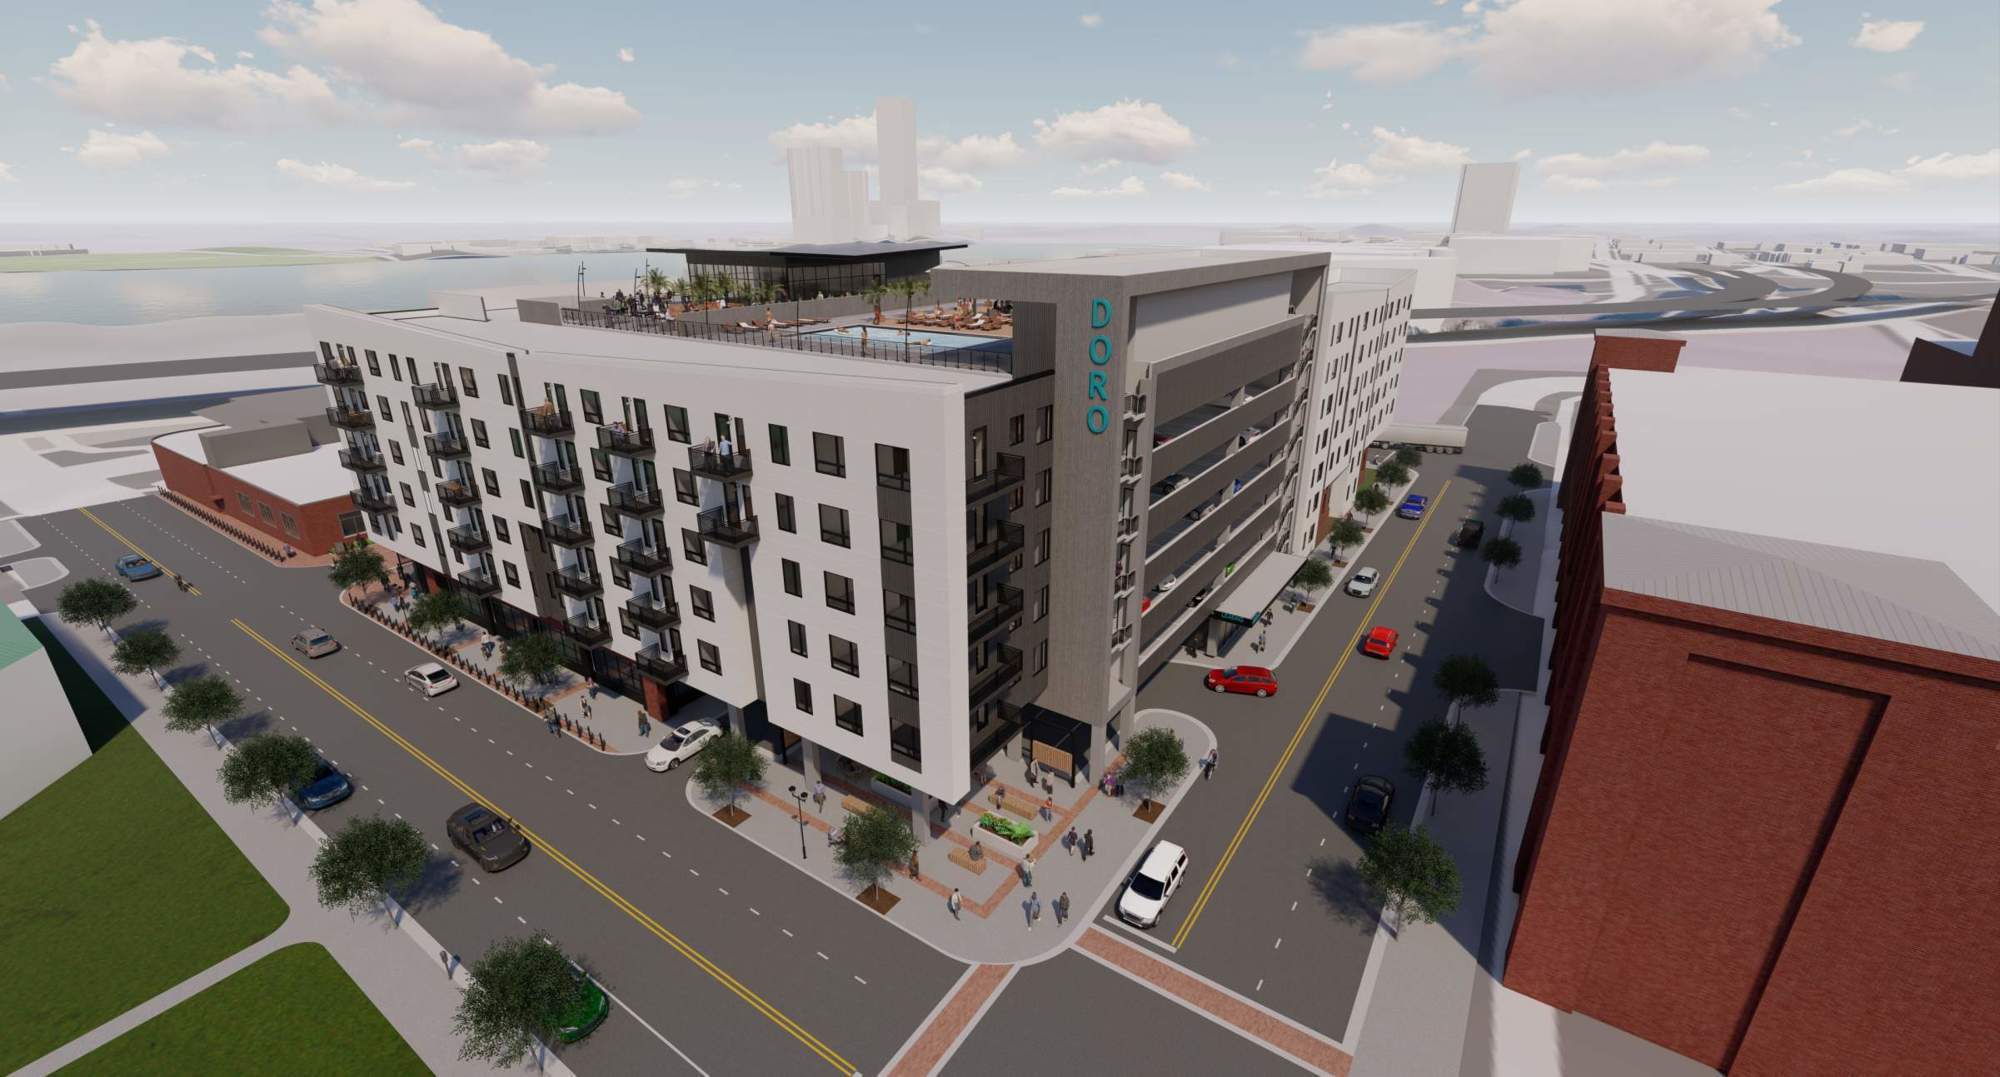 RISE: A Real Estate Company is developing The Doro apartments in Downtown Jacksonville near 121 Financial Ballpark.